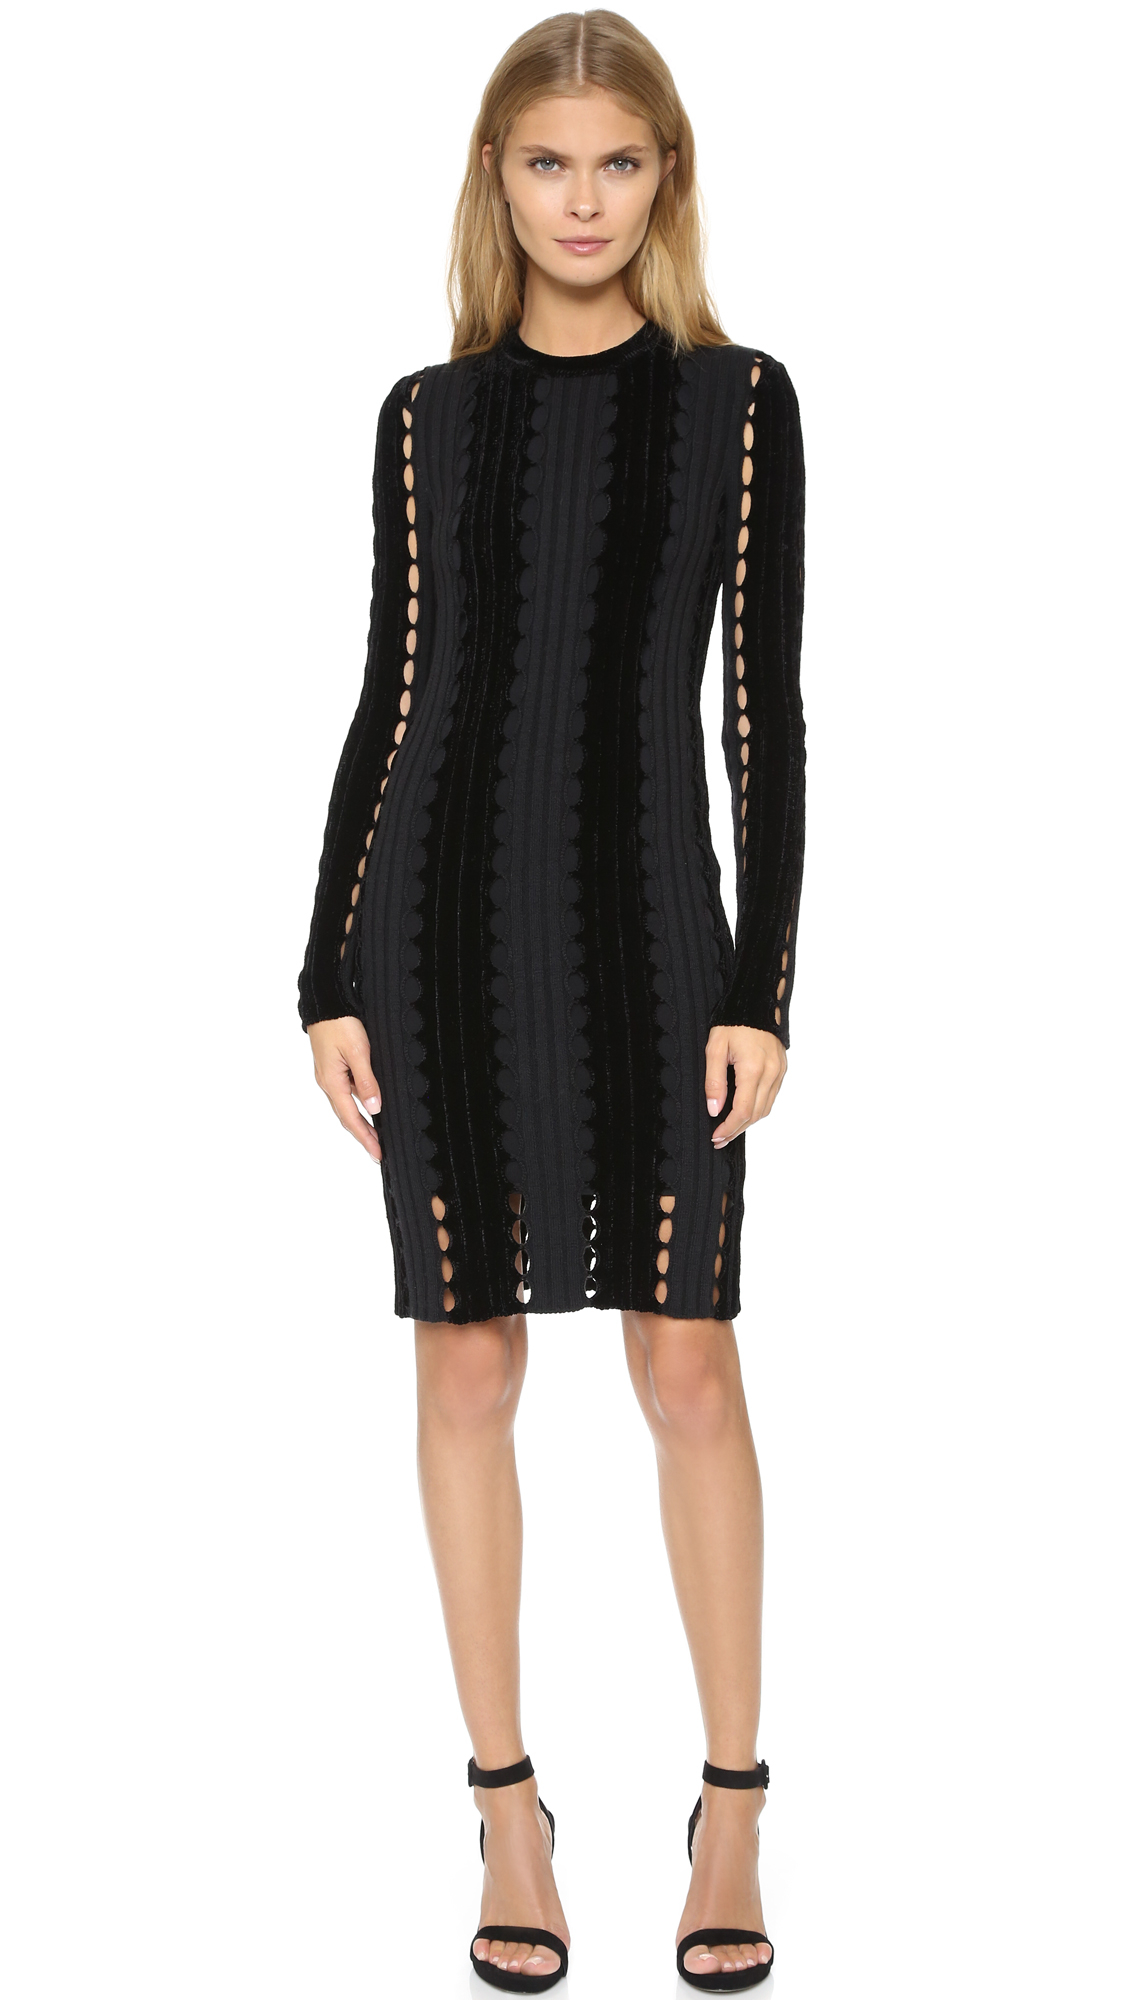 Lyst - Alexander Wang Chenille Cable Knit Dress - Nocturnal in Black